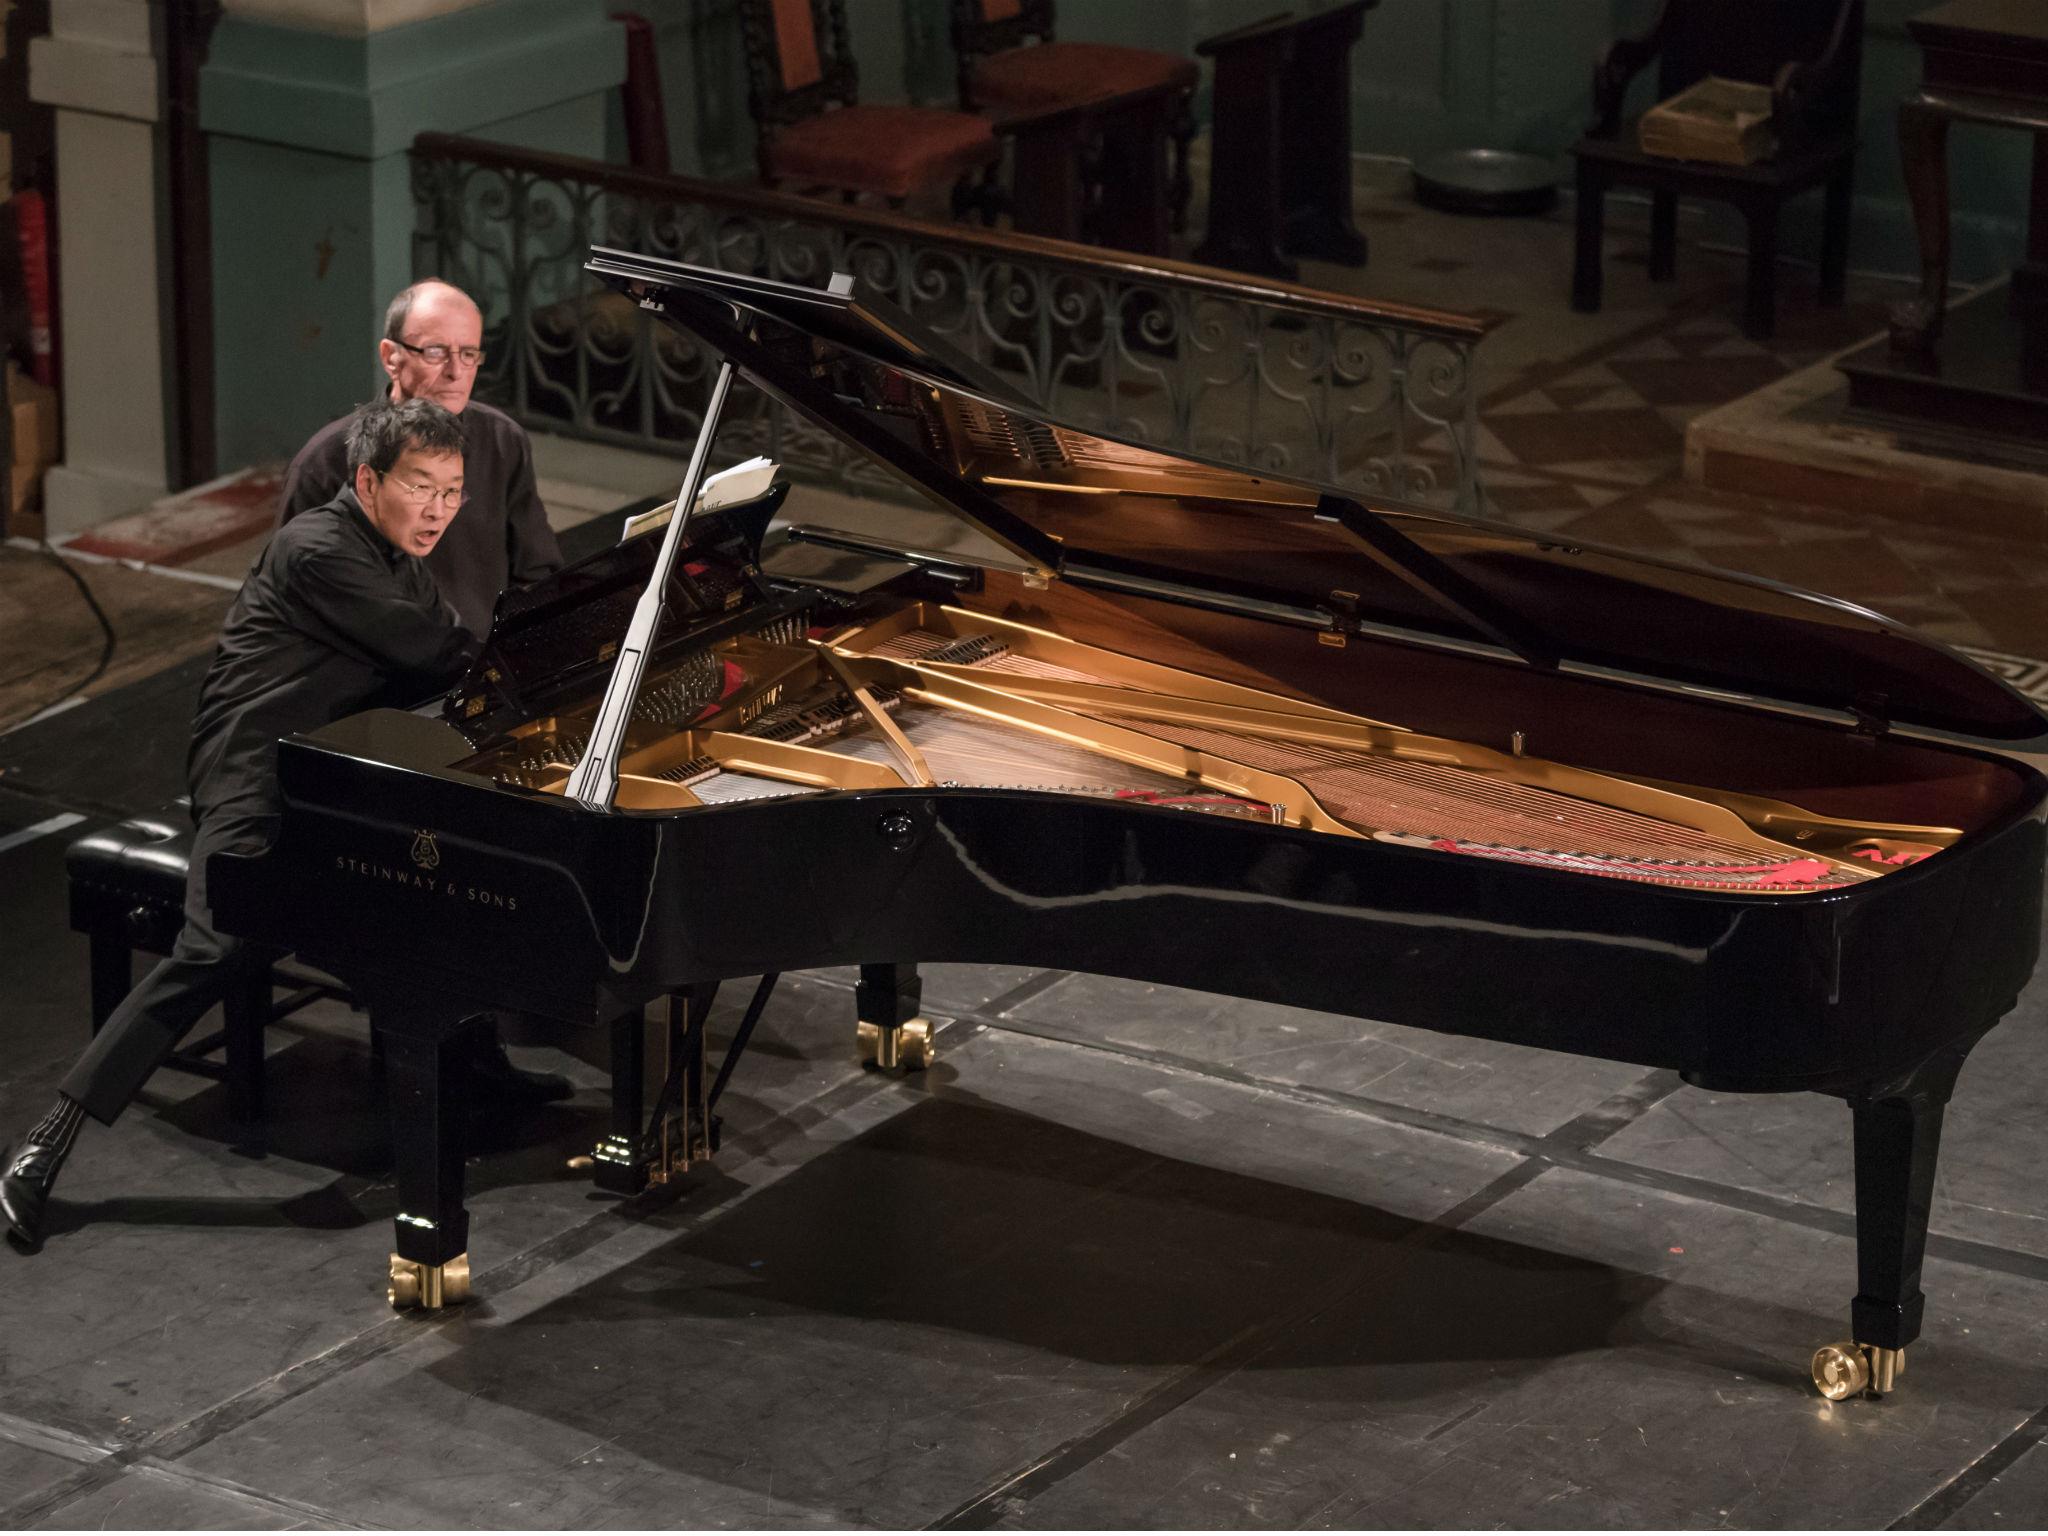 The programme was curated to celebrate the pianist Tan's sixtieth birthday  